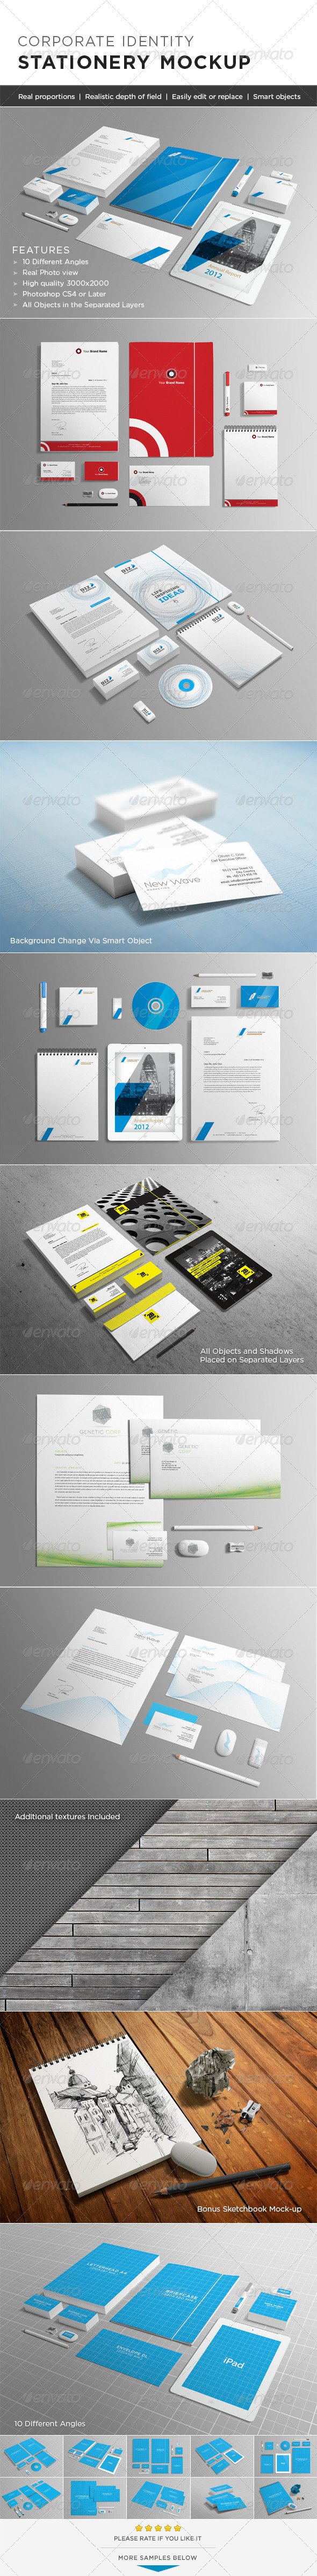 Download Letterhead Graphics Designs Templates From Graphicriver PSD Mockup Templates